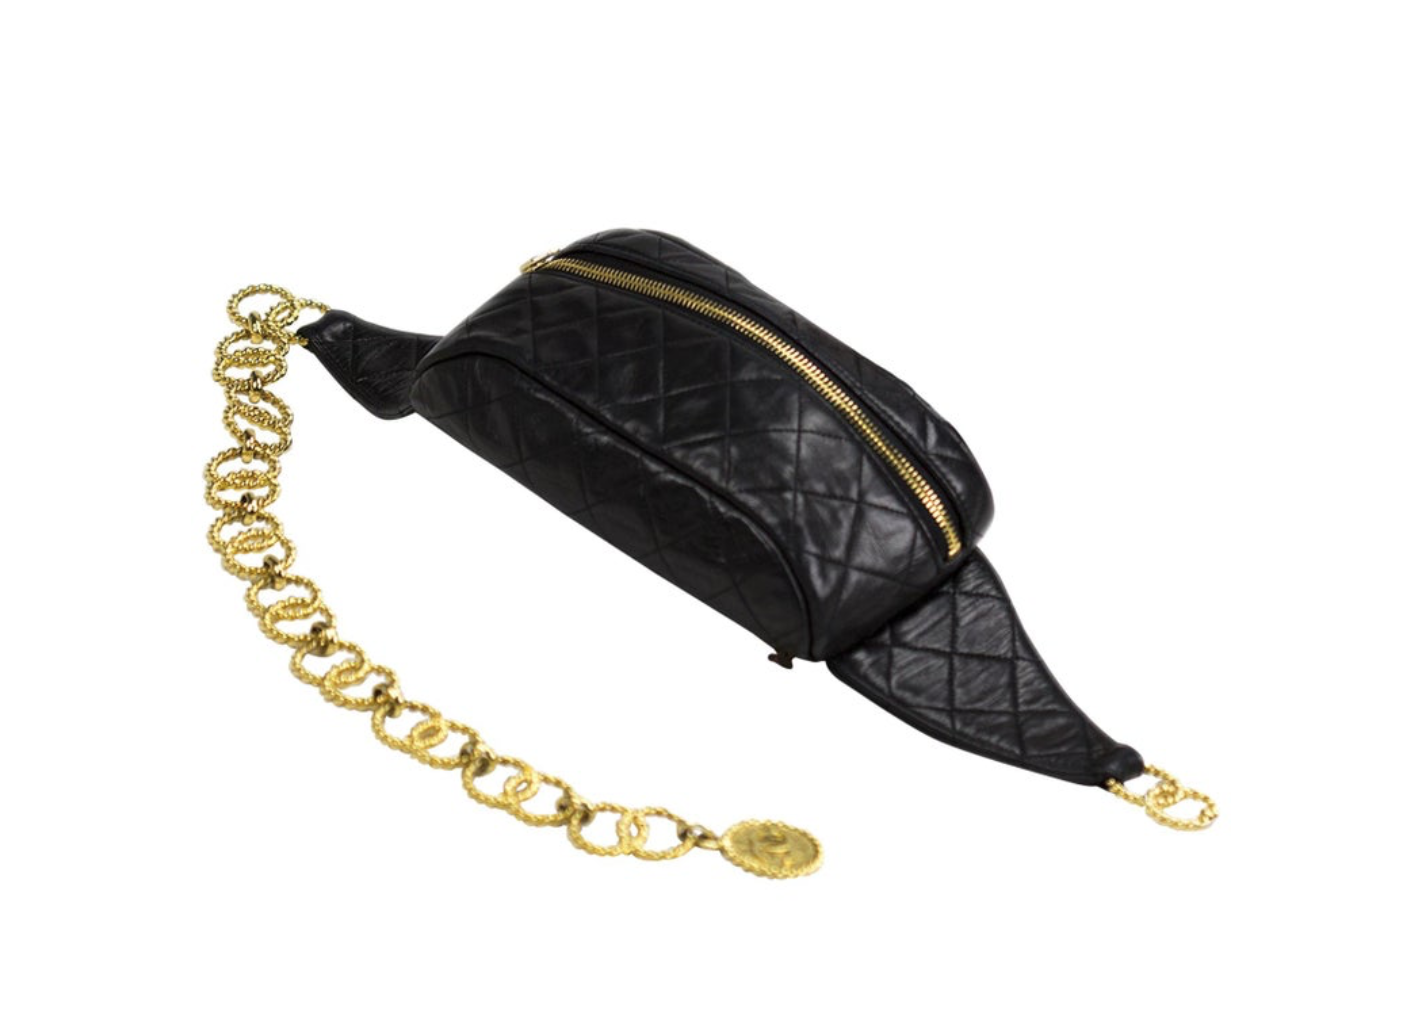 vintage Chanel quilted black lambskin fanny pack from 1stdibs.com for $6300.